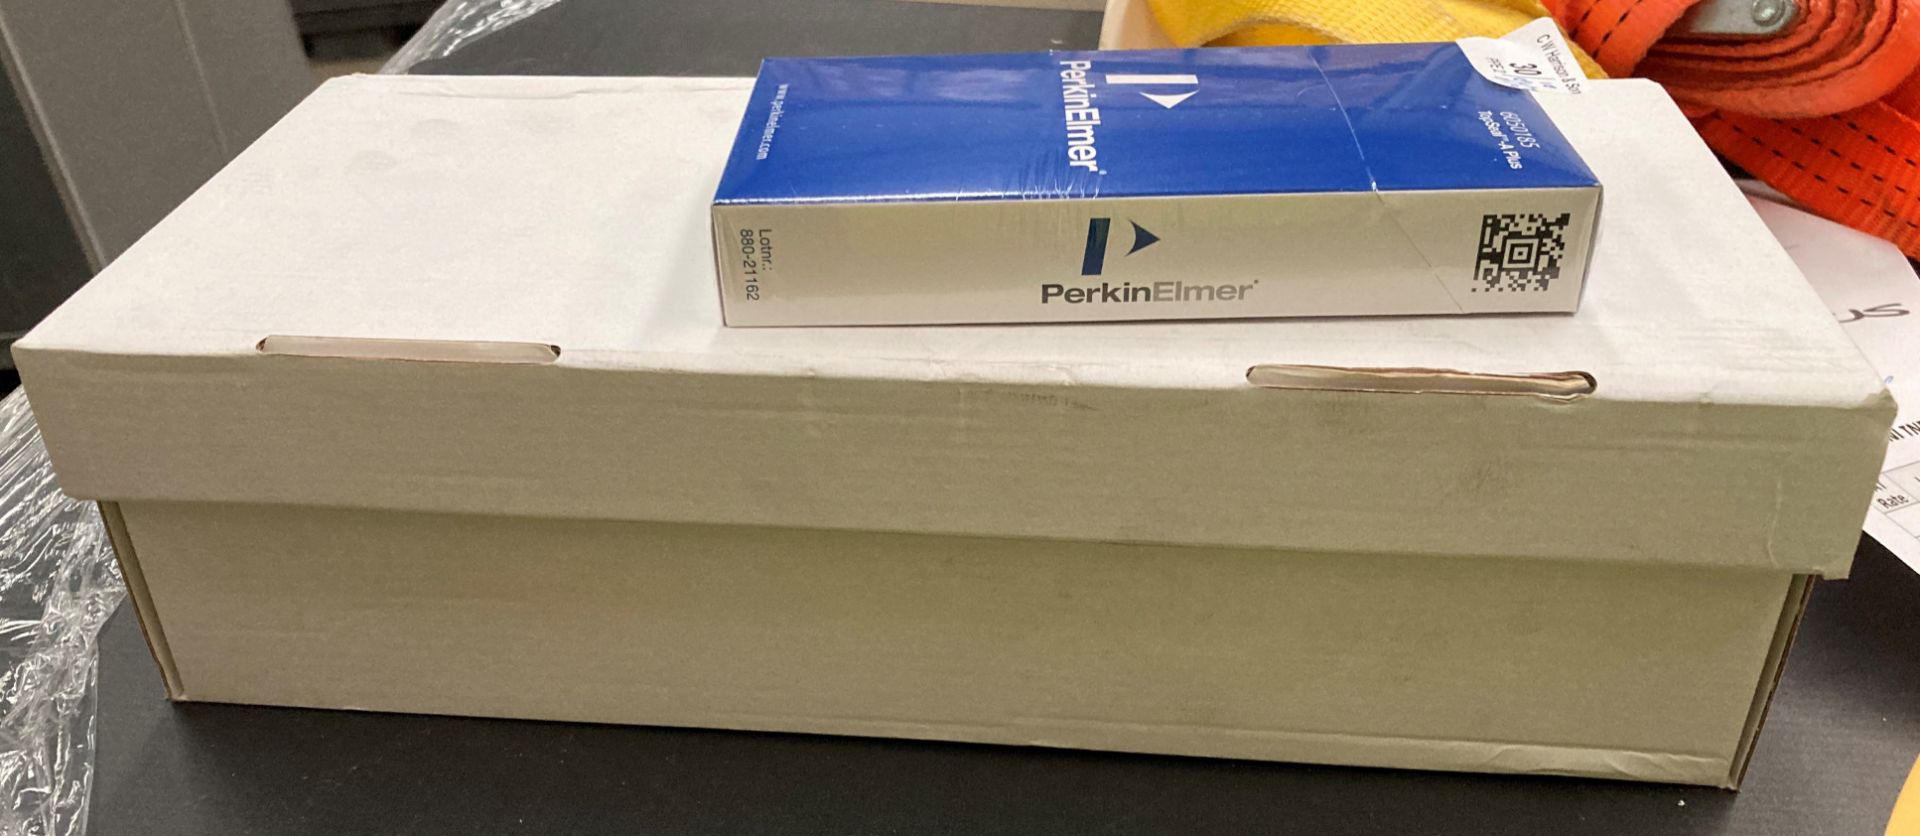 200 x Packs of PerkinElmer Top Seal - A Plus 6050185 clear adhesive microplate seals - 100 units - Image 4 of 5